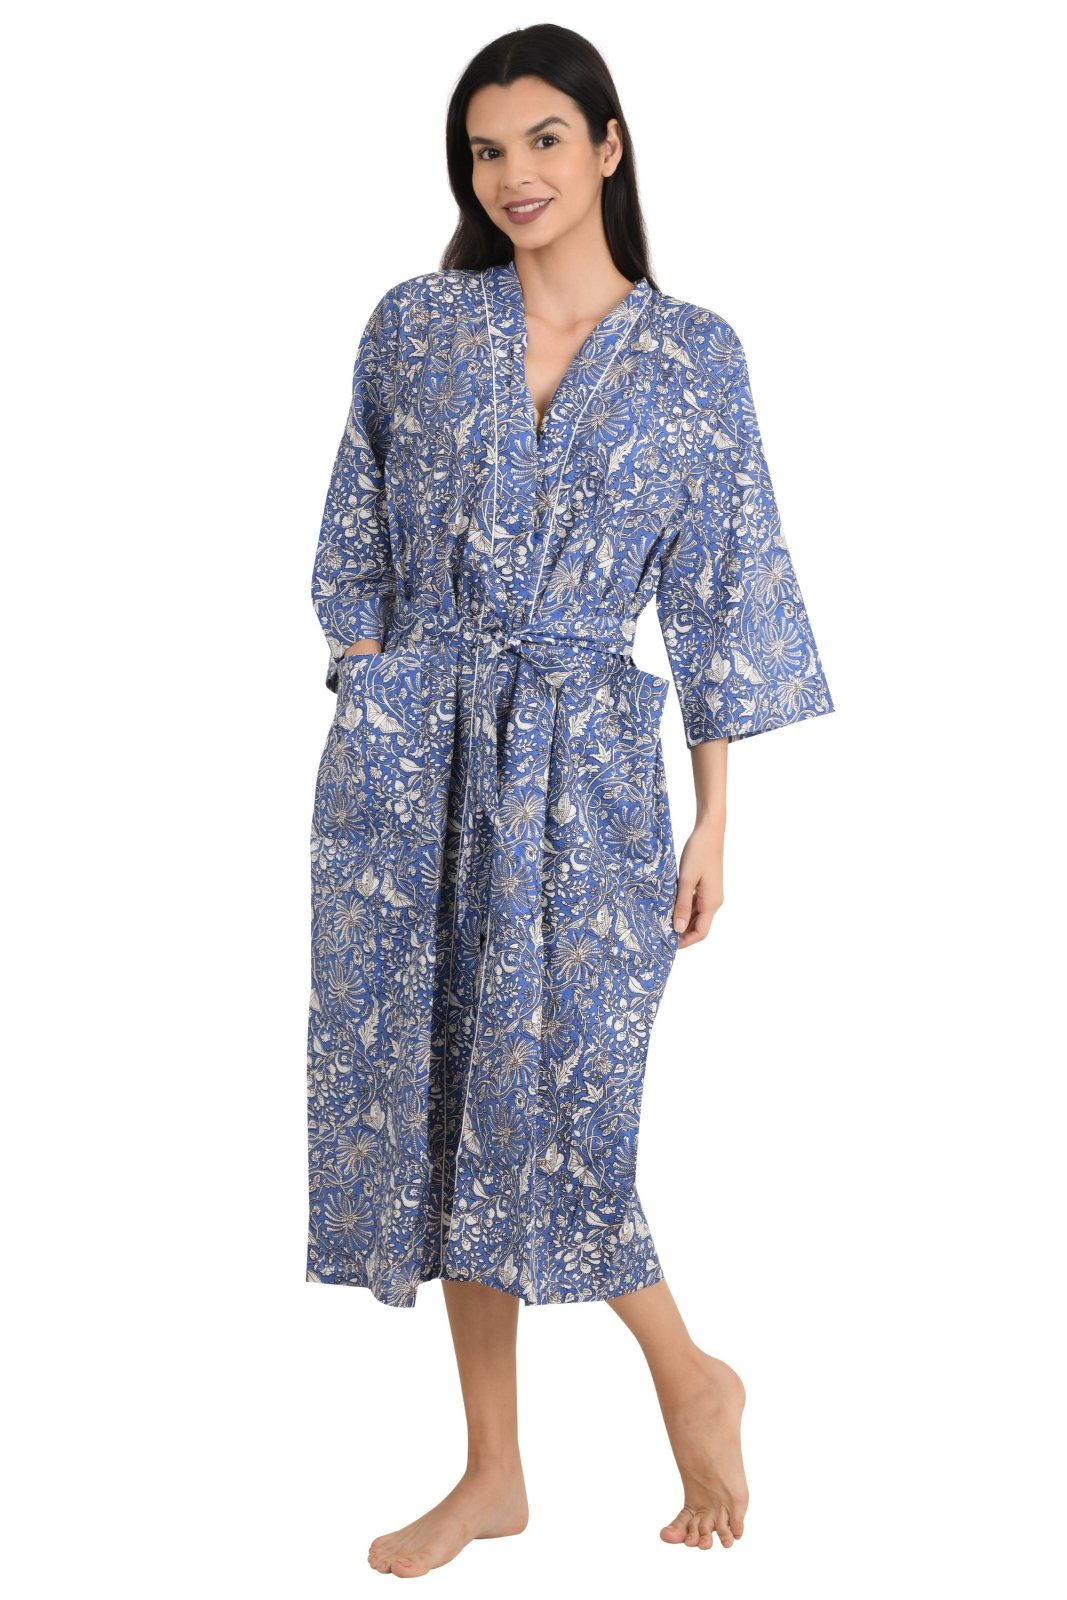 Boho Cotton Kimono House Robe Indian Handprinted Batterfly Floral Print Pattern | Lightweight Summer Luxury Beach Holidays Yacht Cover Up Stunning Dress - The Eastern Loom